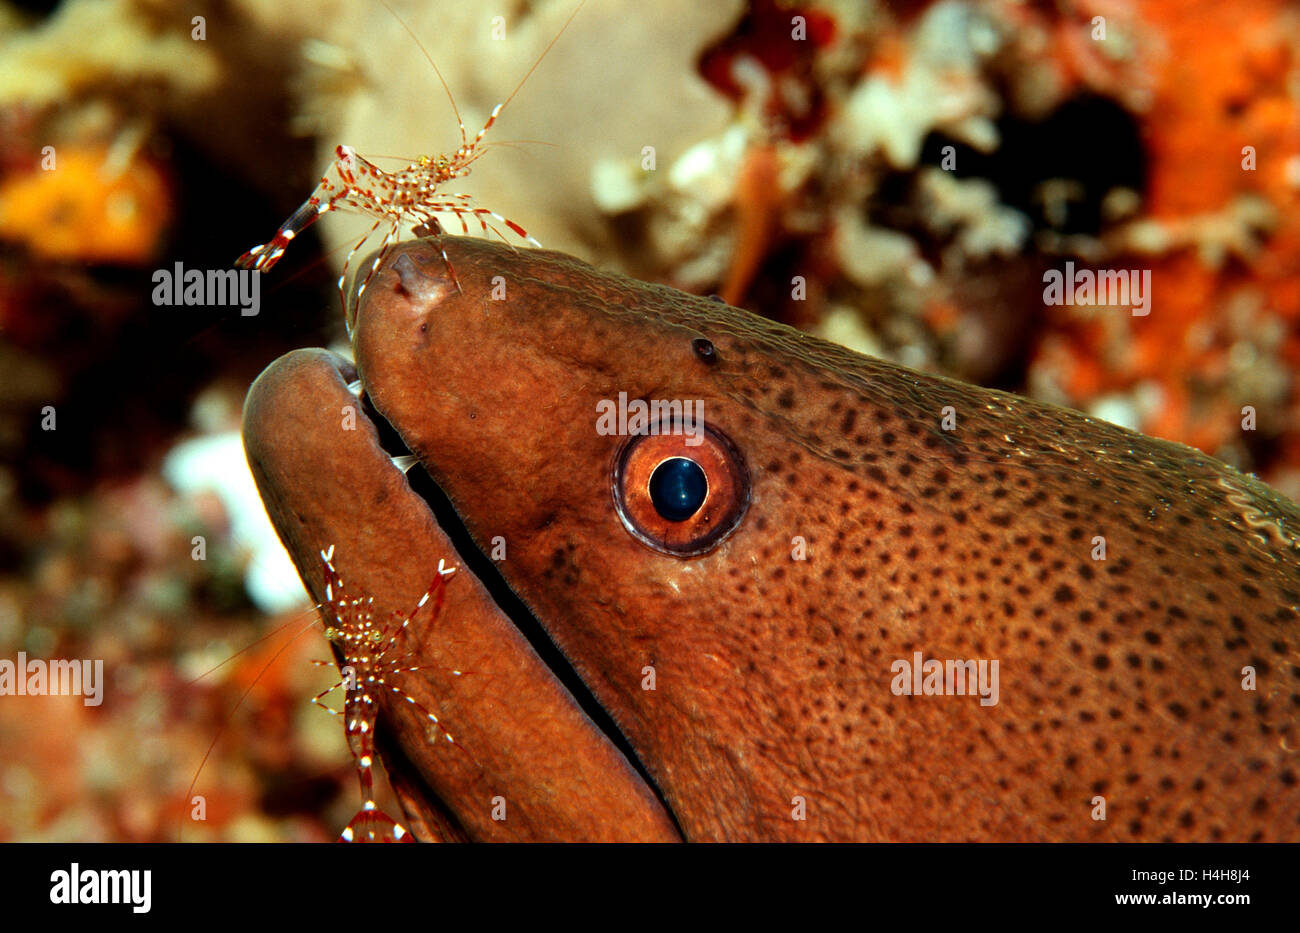 Red-white Spotted Cleaner Shrimp, Palaemnoid Shrimp (Leandrites cyrtorhynchus) cleaning a Yellow-edged Moray (Gymnothorax Stock Photo